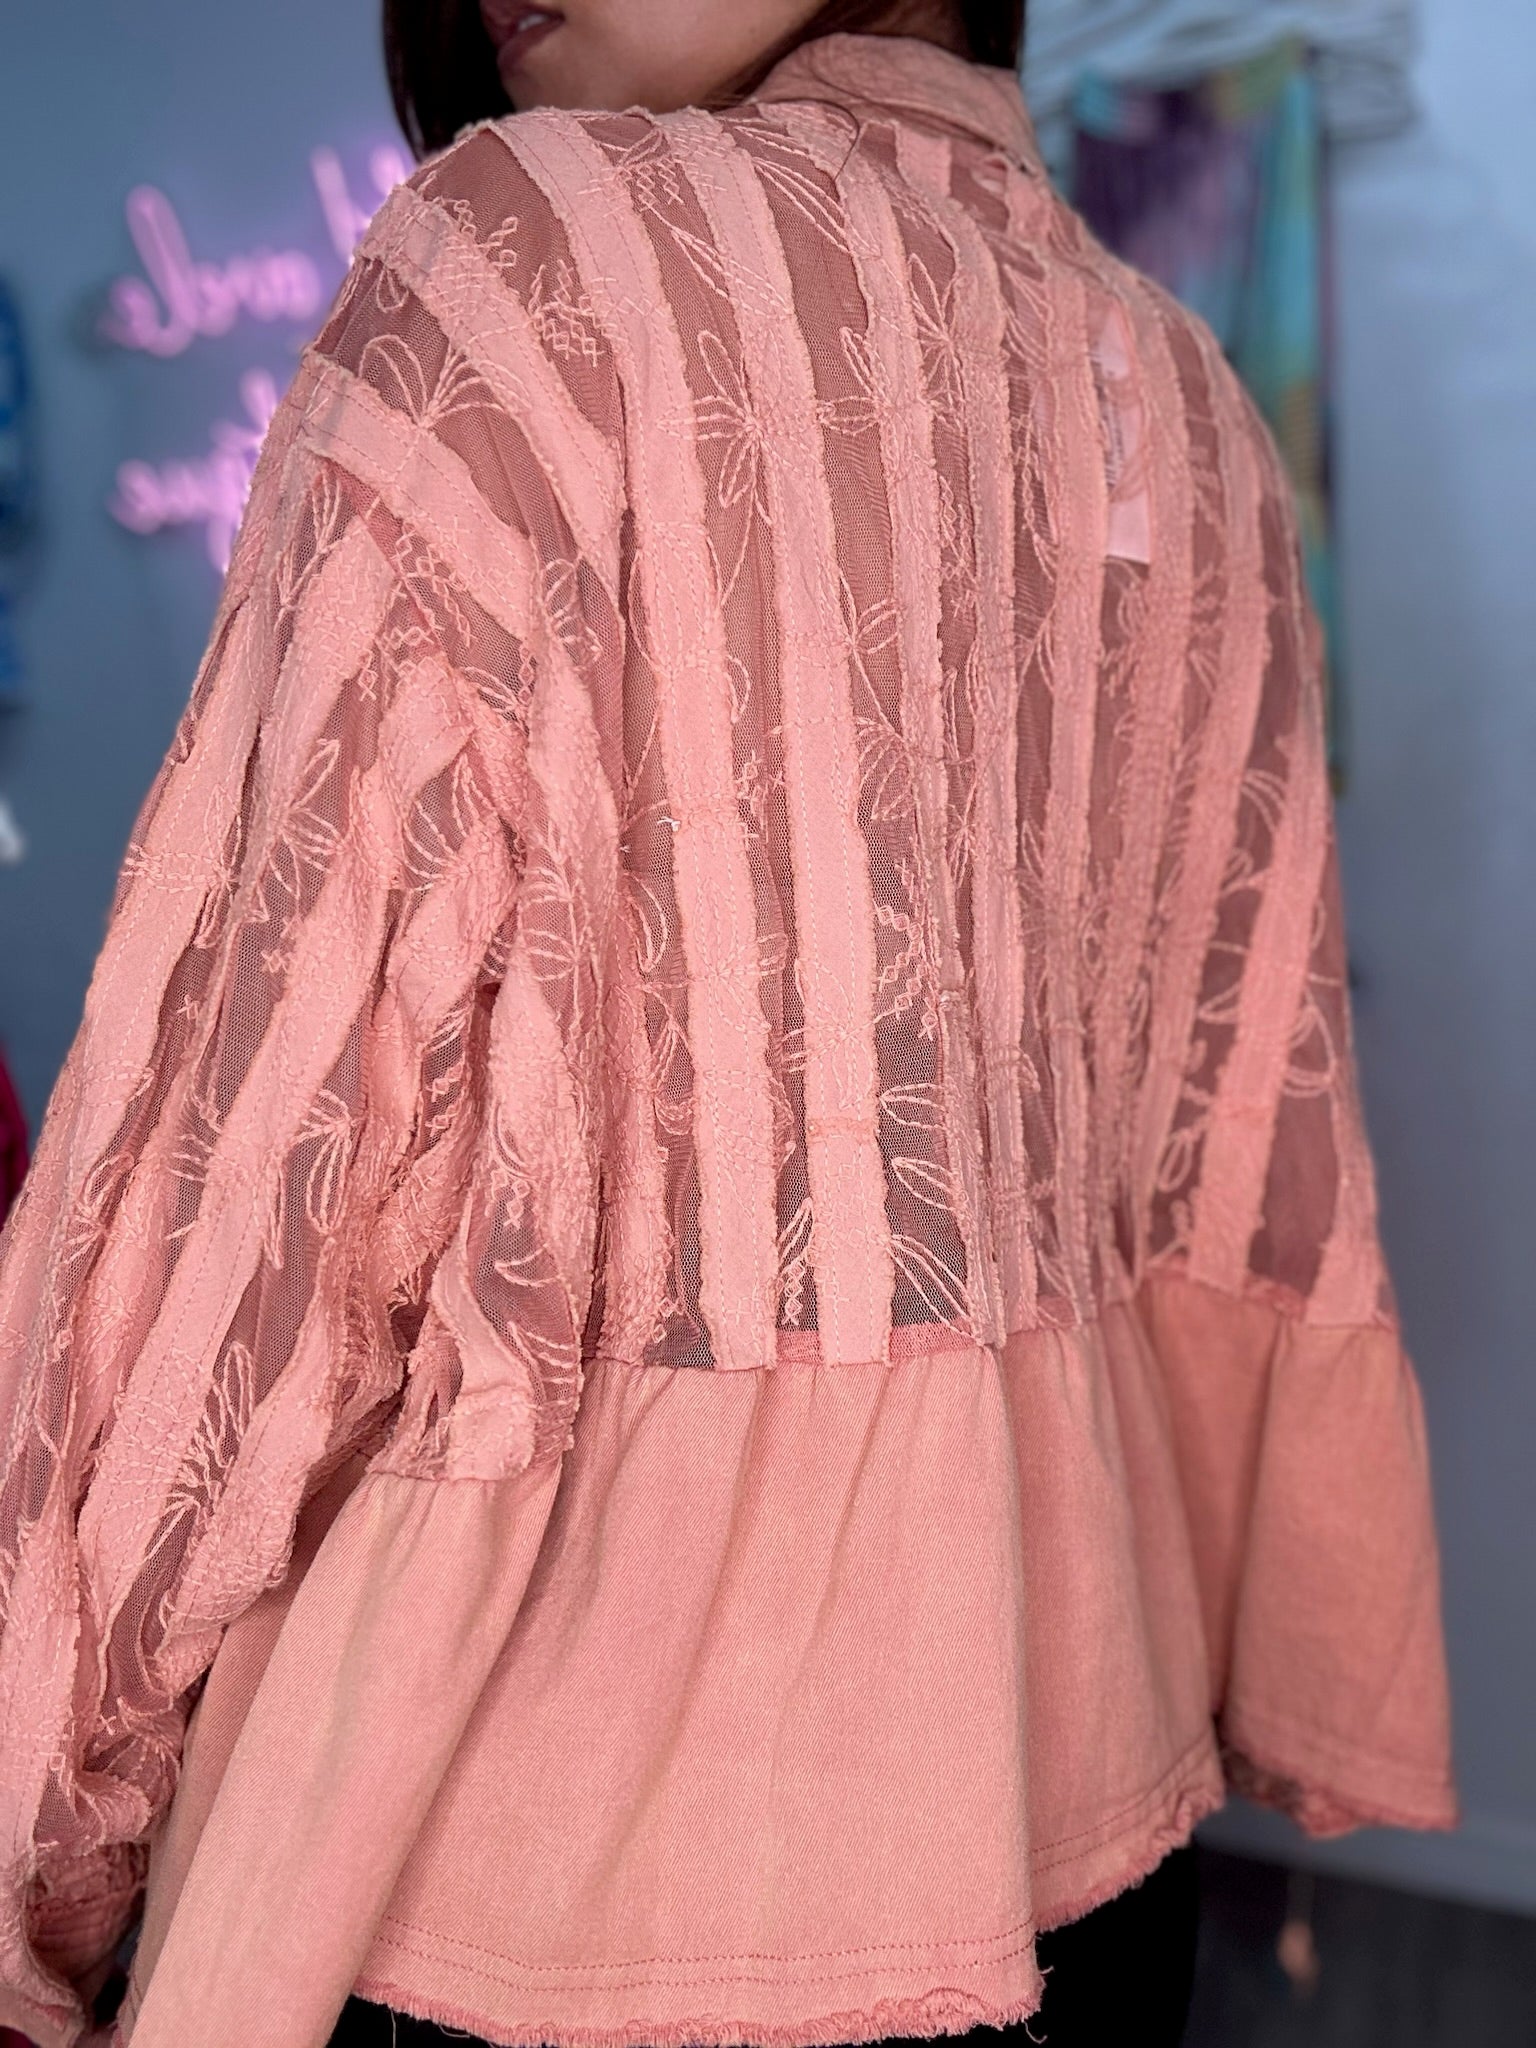 The Blush Lace Button Down Top